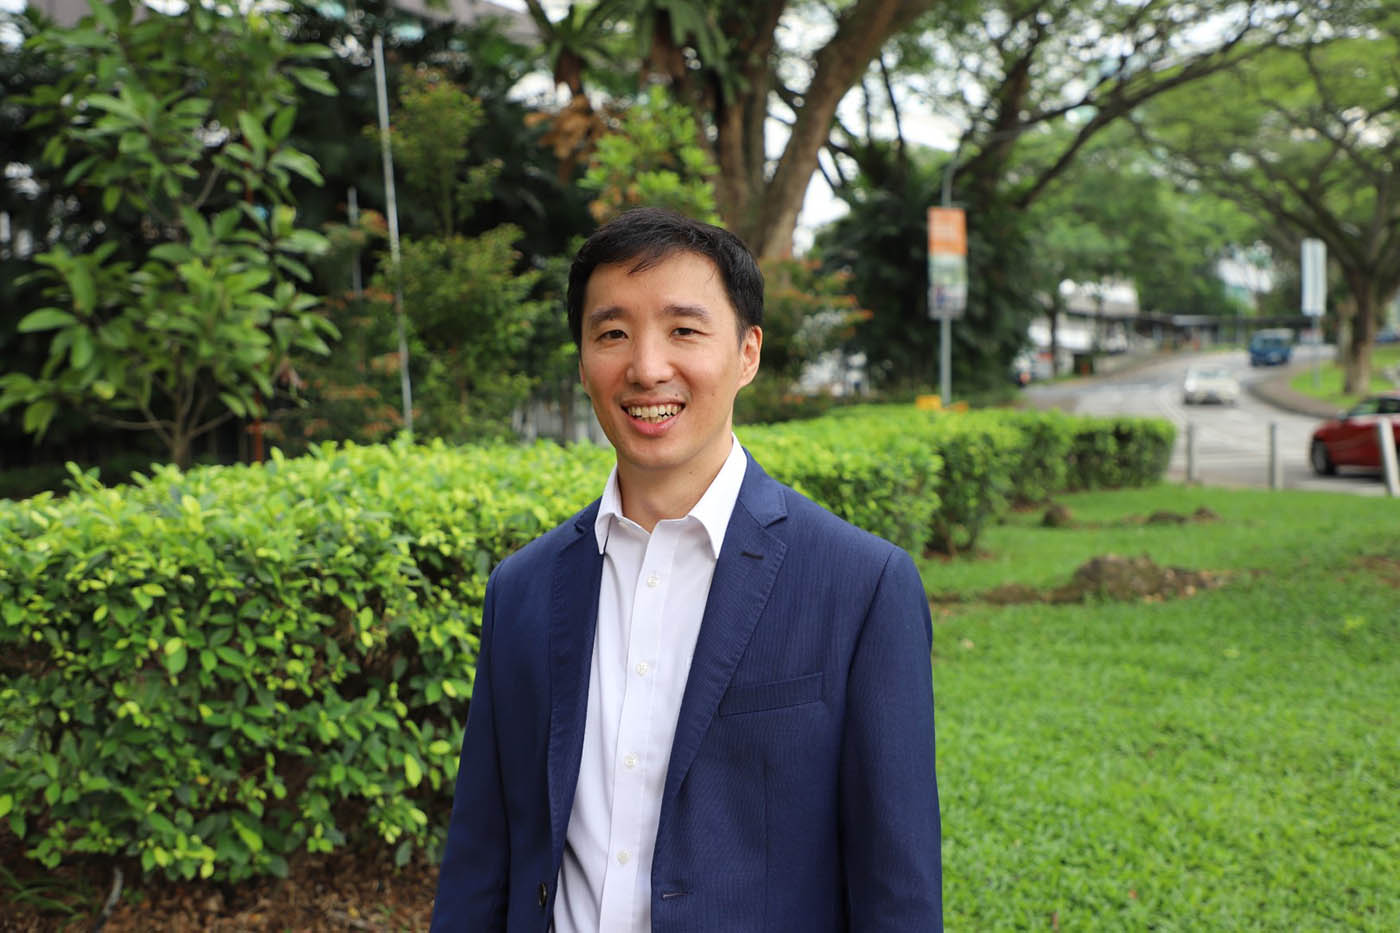 Quantum physicist Alexander Ling at the National University of Singapore pictured standing in a green corner of the university campus